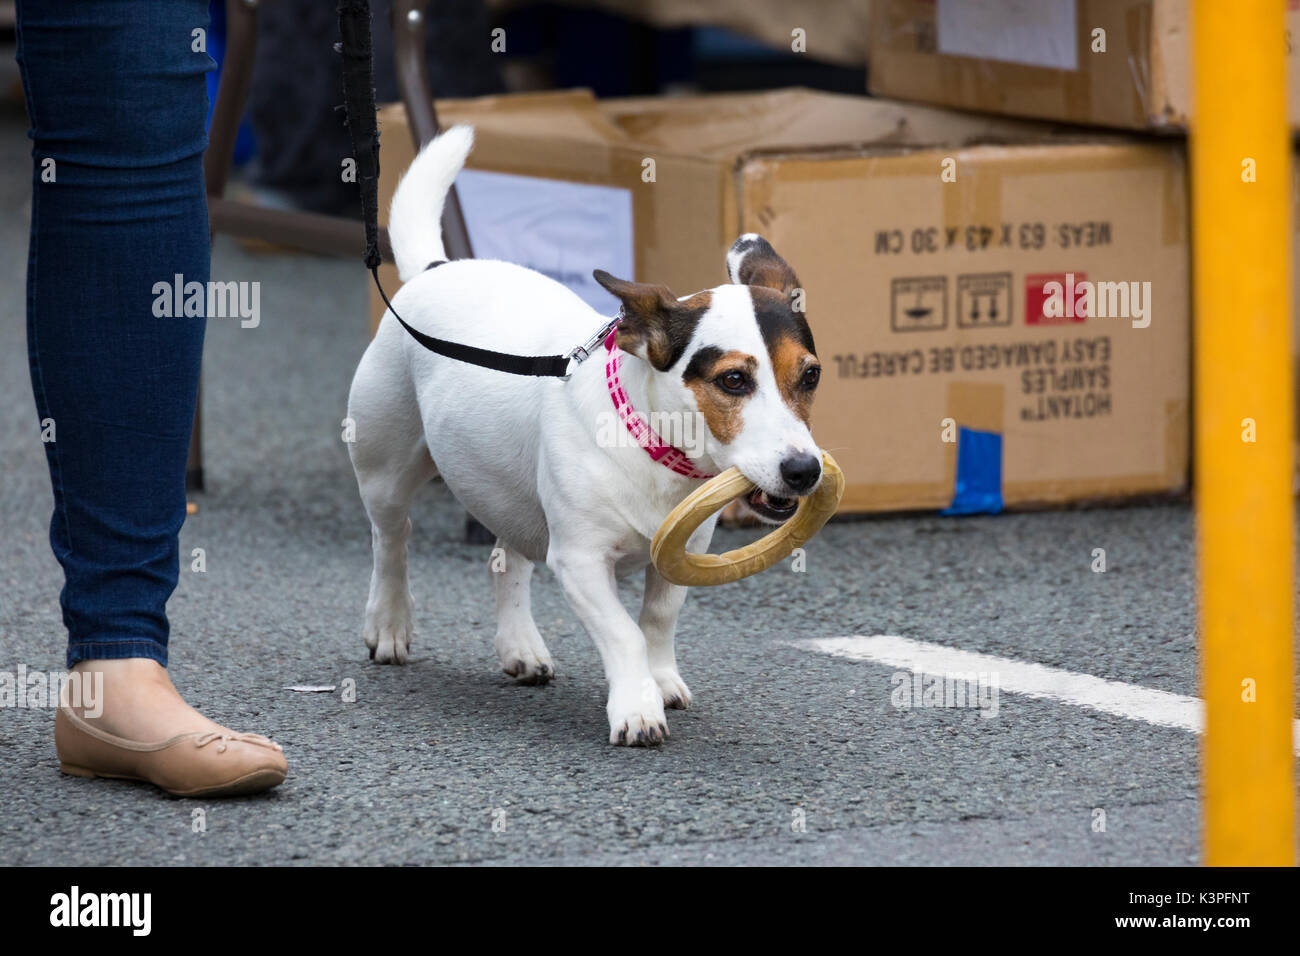 A Jack Russell Terrior dog walking on a leash with a dog chew in its mouth next to its owner in a busy Saturday Market in Mold, Flintshire, Wales Stock Photo